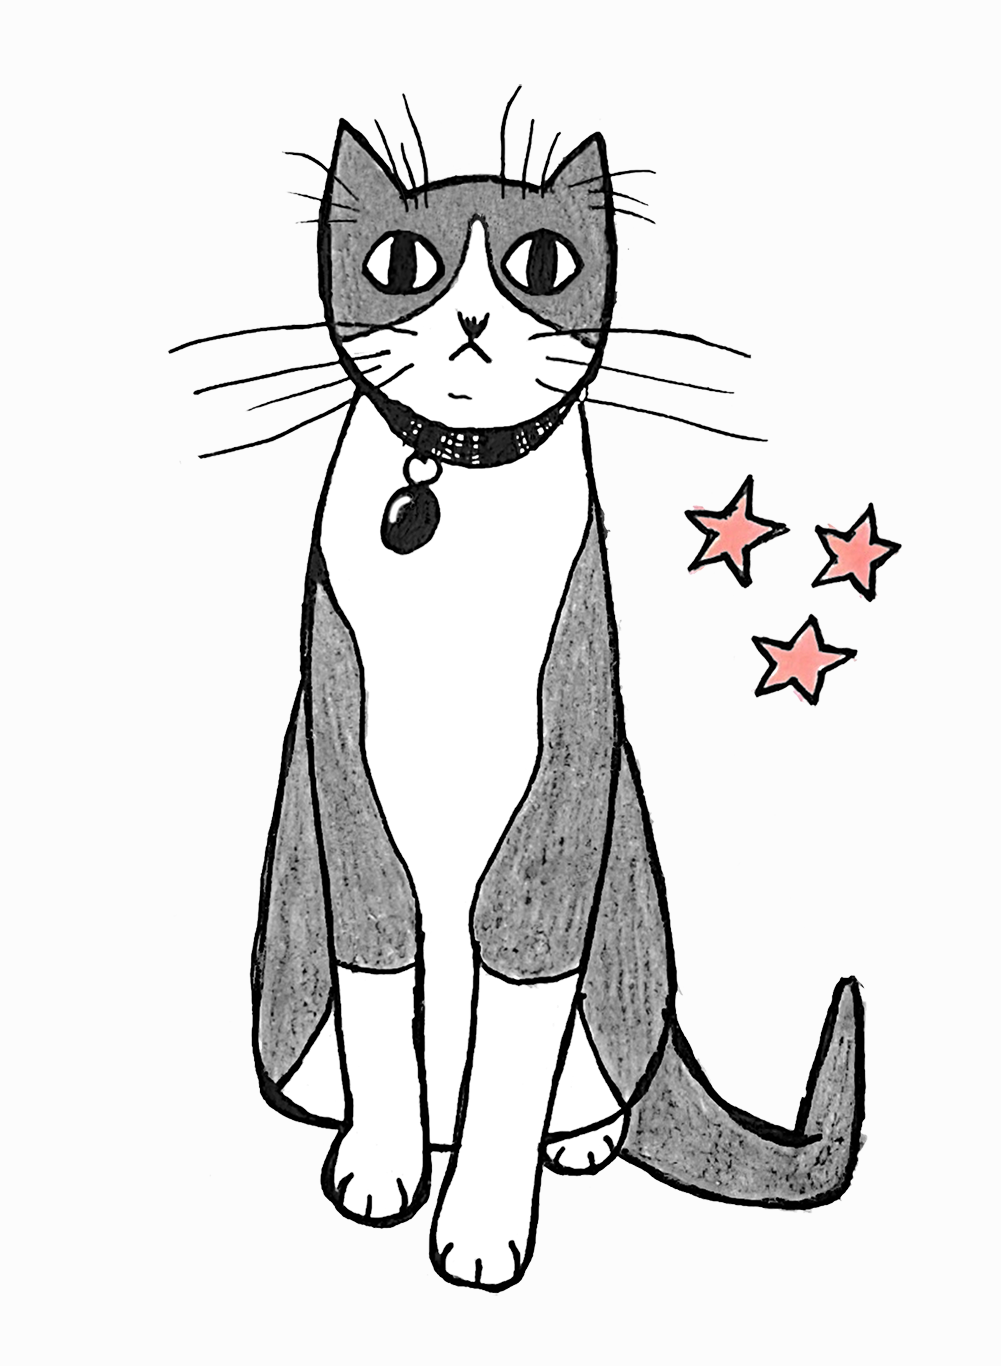 Stylized drawing of a tuxedo cat with a black collar and tag sitting on a slightly off-white background. There are 3 small pink stars right next to him, on the right side.